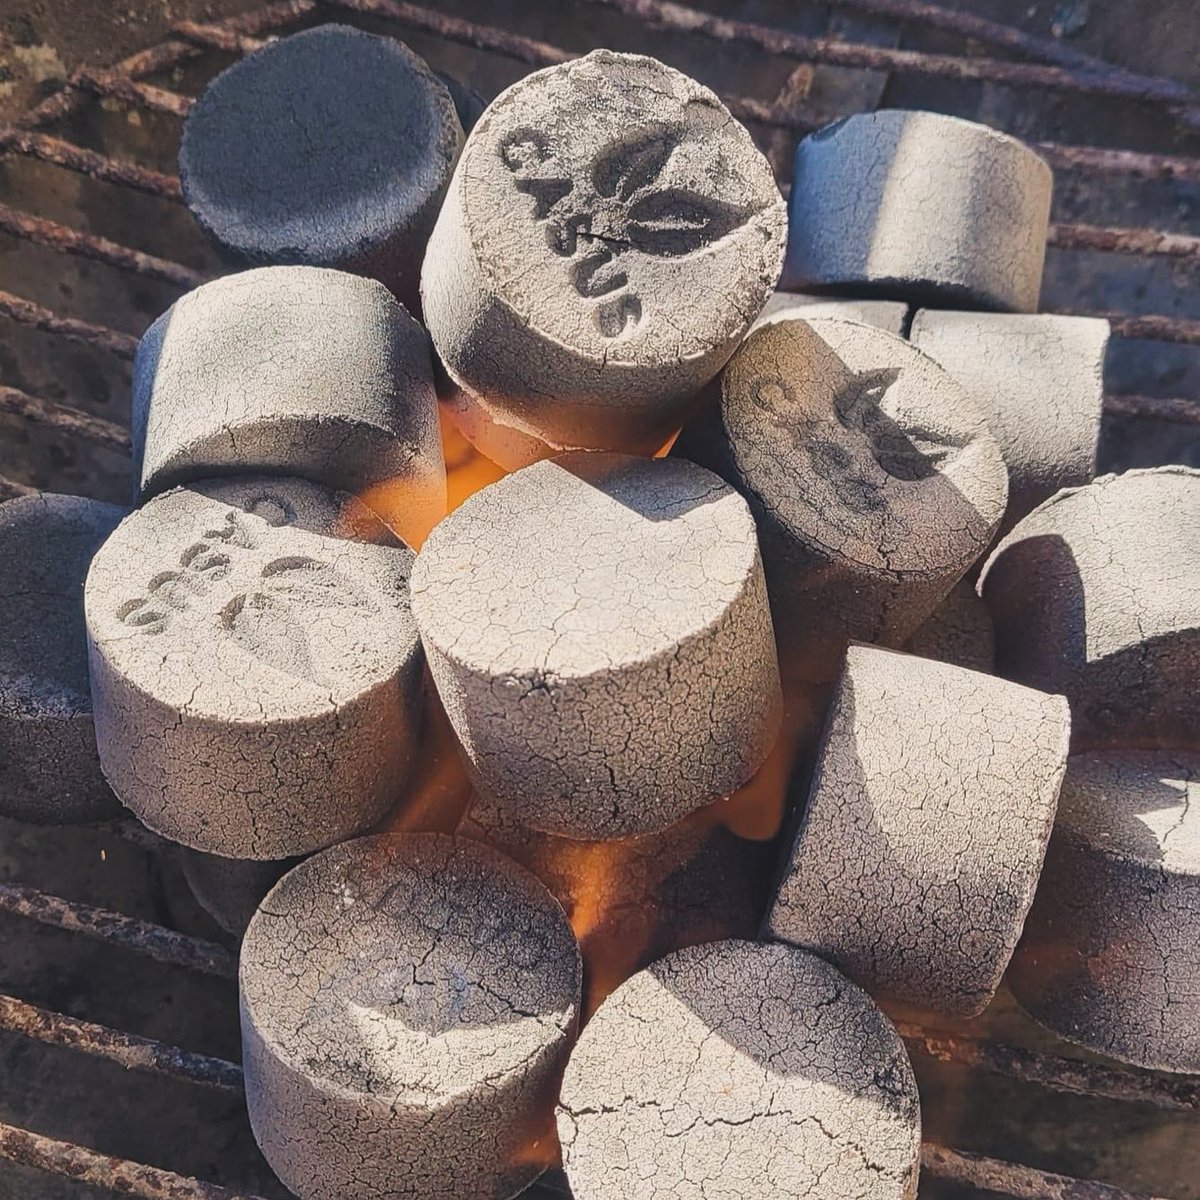 Ready for the next BBQ with the Casus Jnstant Charcoal 🔥🧡 #casusgrill 

#grilling #bbq #ecofriendly #ecofriendlybbq #sustainable  #greenliving #outdoors #outdoorcooking #gogreen #picnic #bamboo #chooseabetterfuture  #gogreen #instantcharcoal #bamboocharcoal